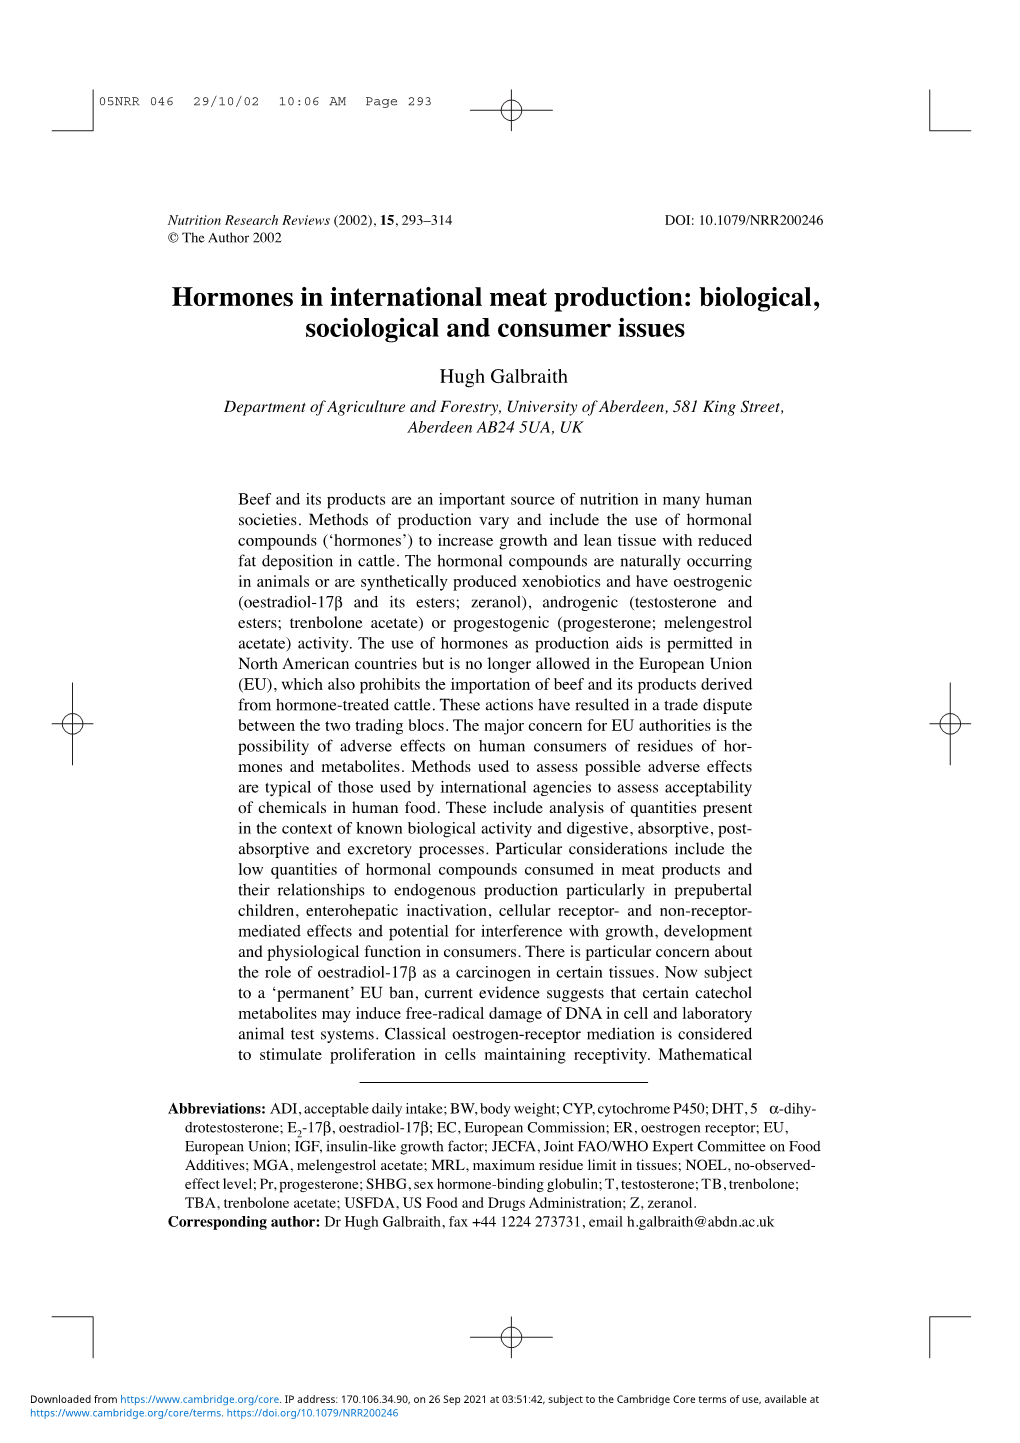 Hormones in International Meat Production: Biological, Sociological and Consumer Issues